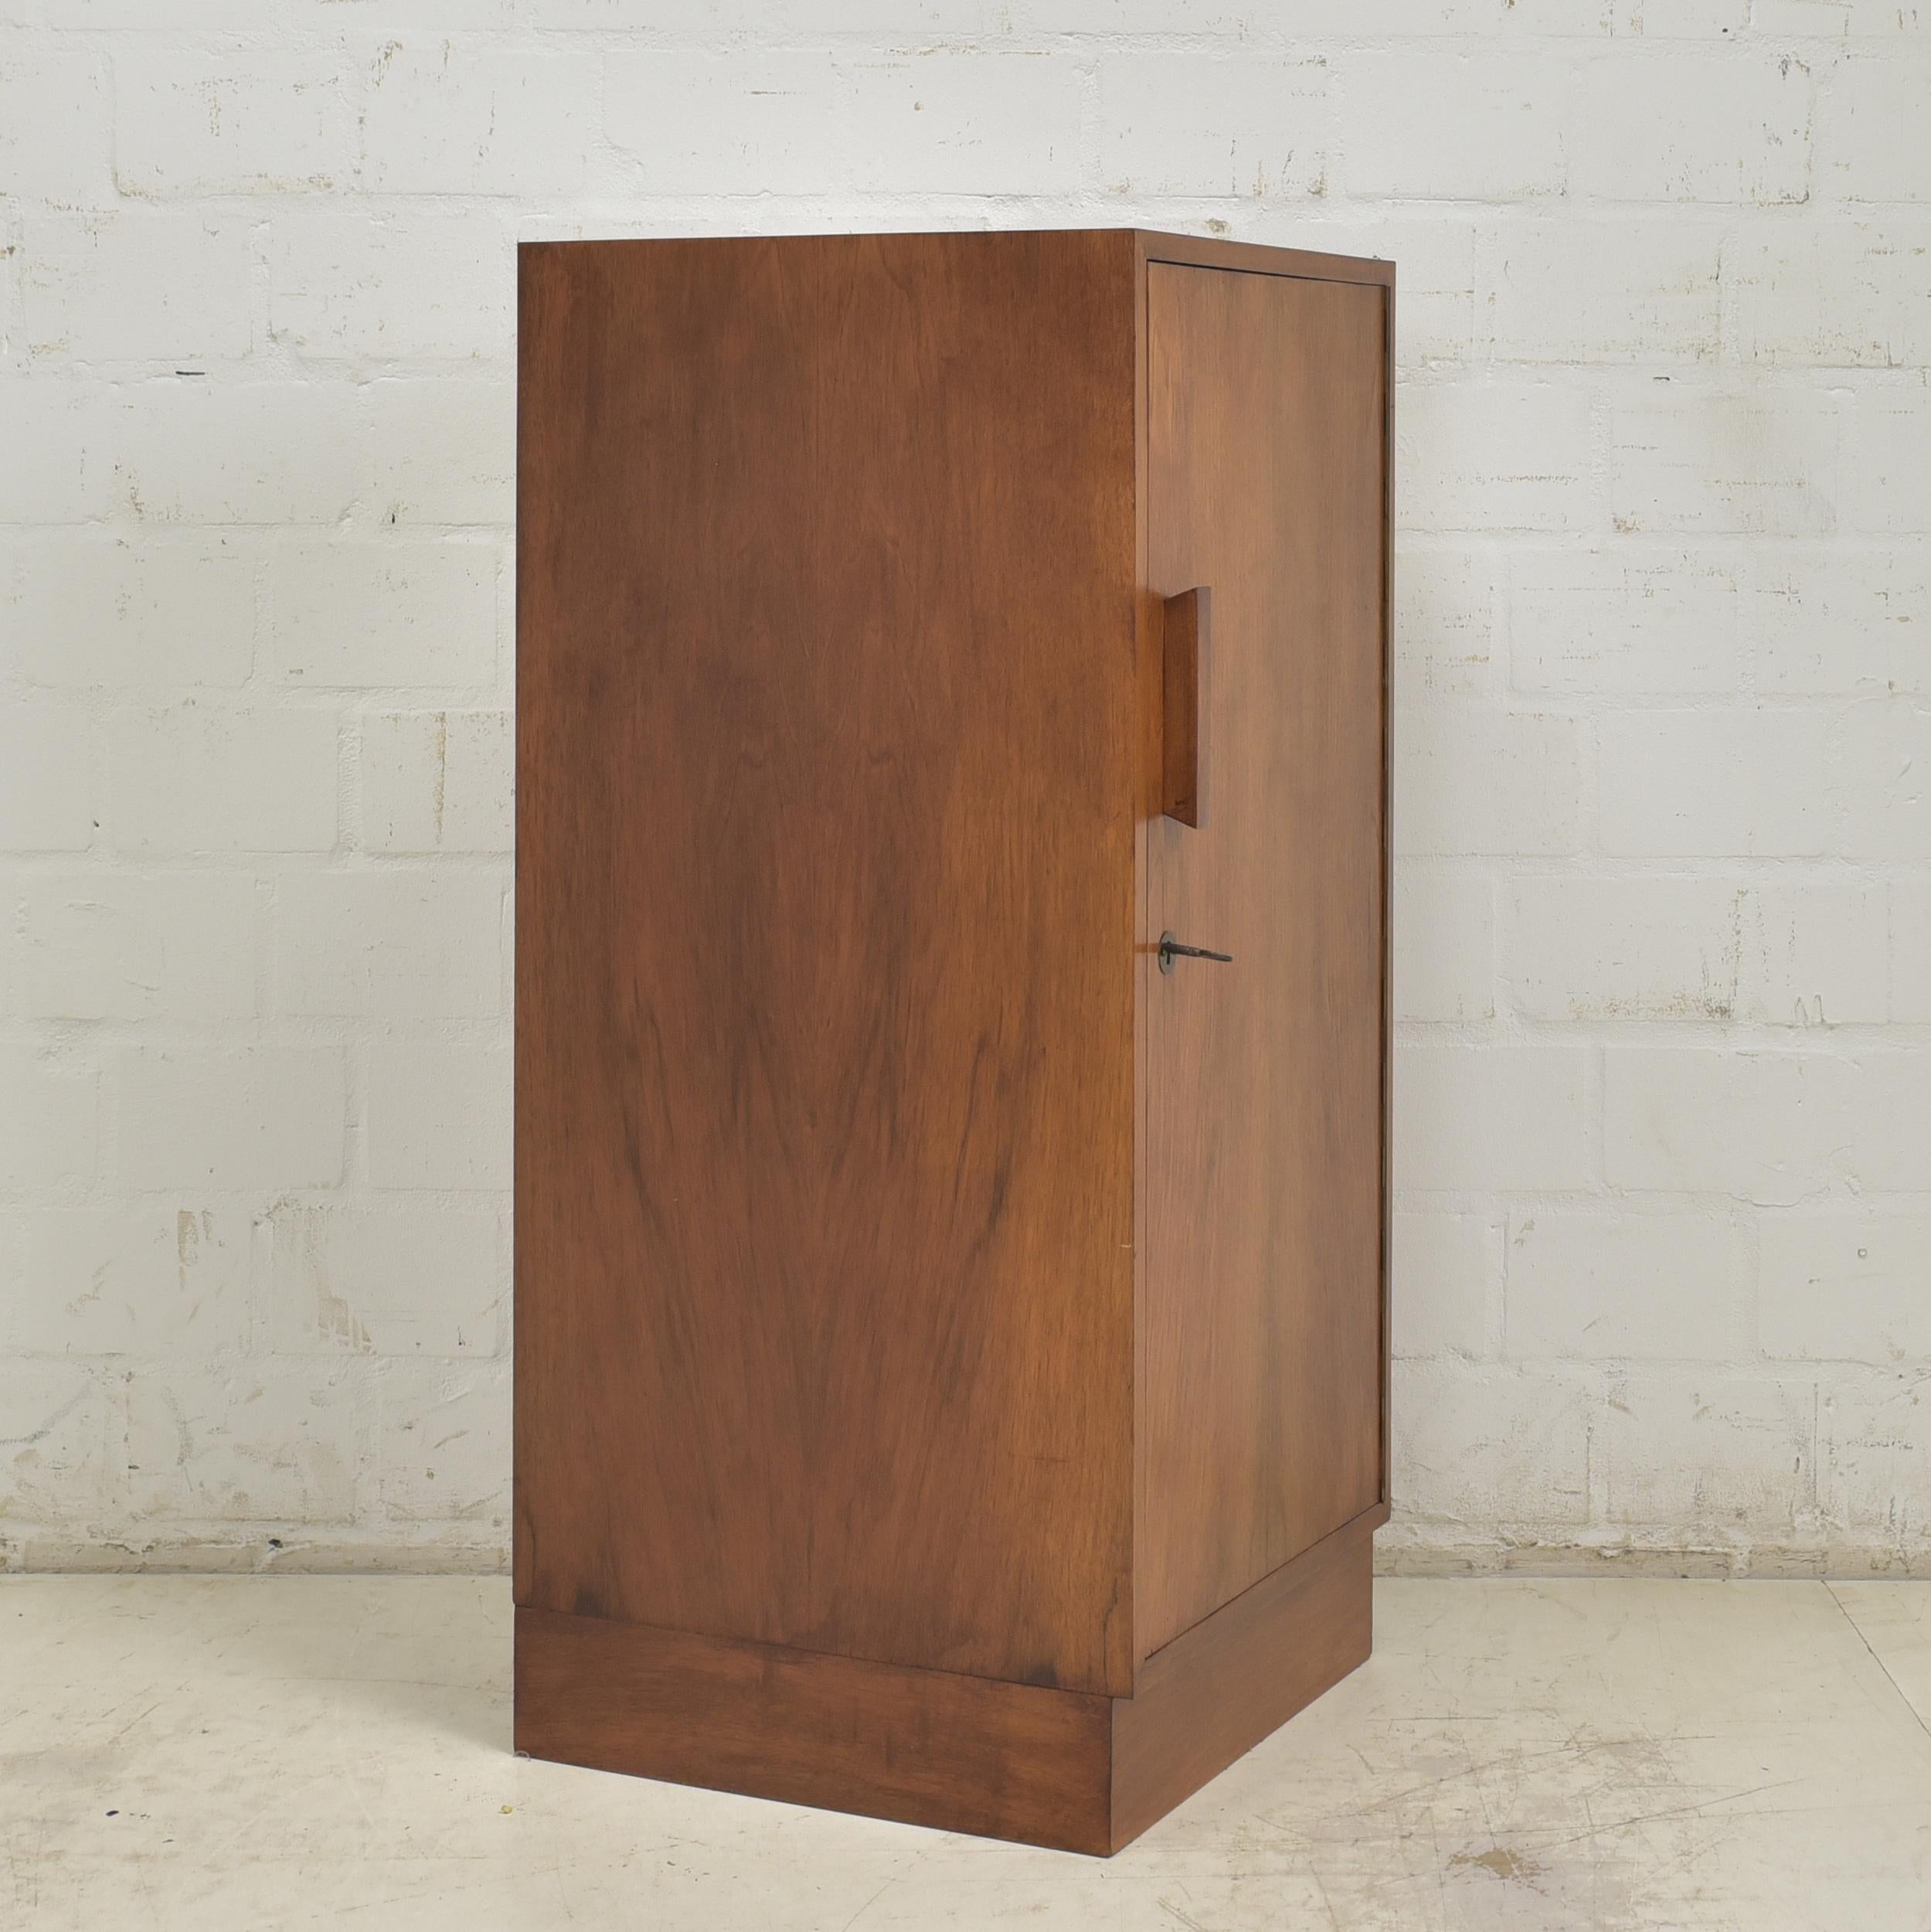 Retro Midcentury Art Deco Narrow Chest of Drawers / Small Cabinet, 1950 For Sale 6